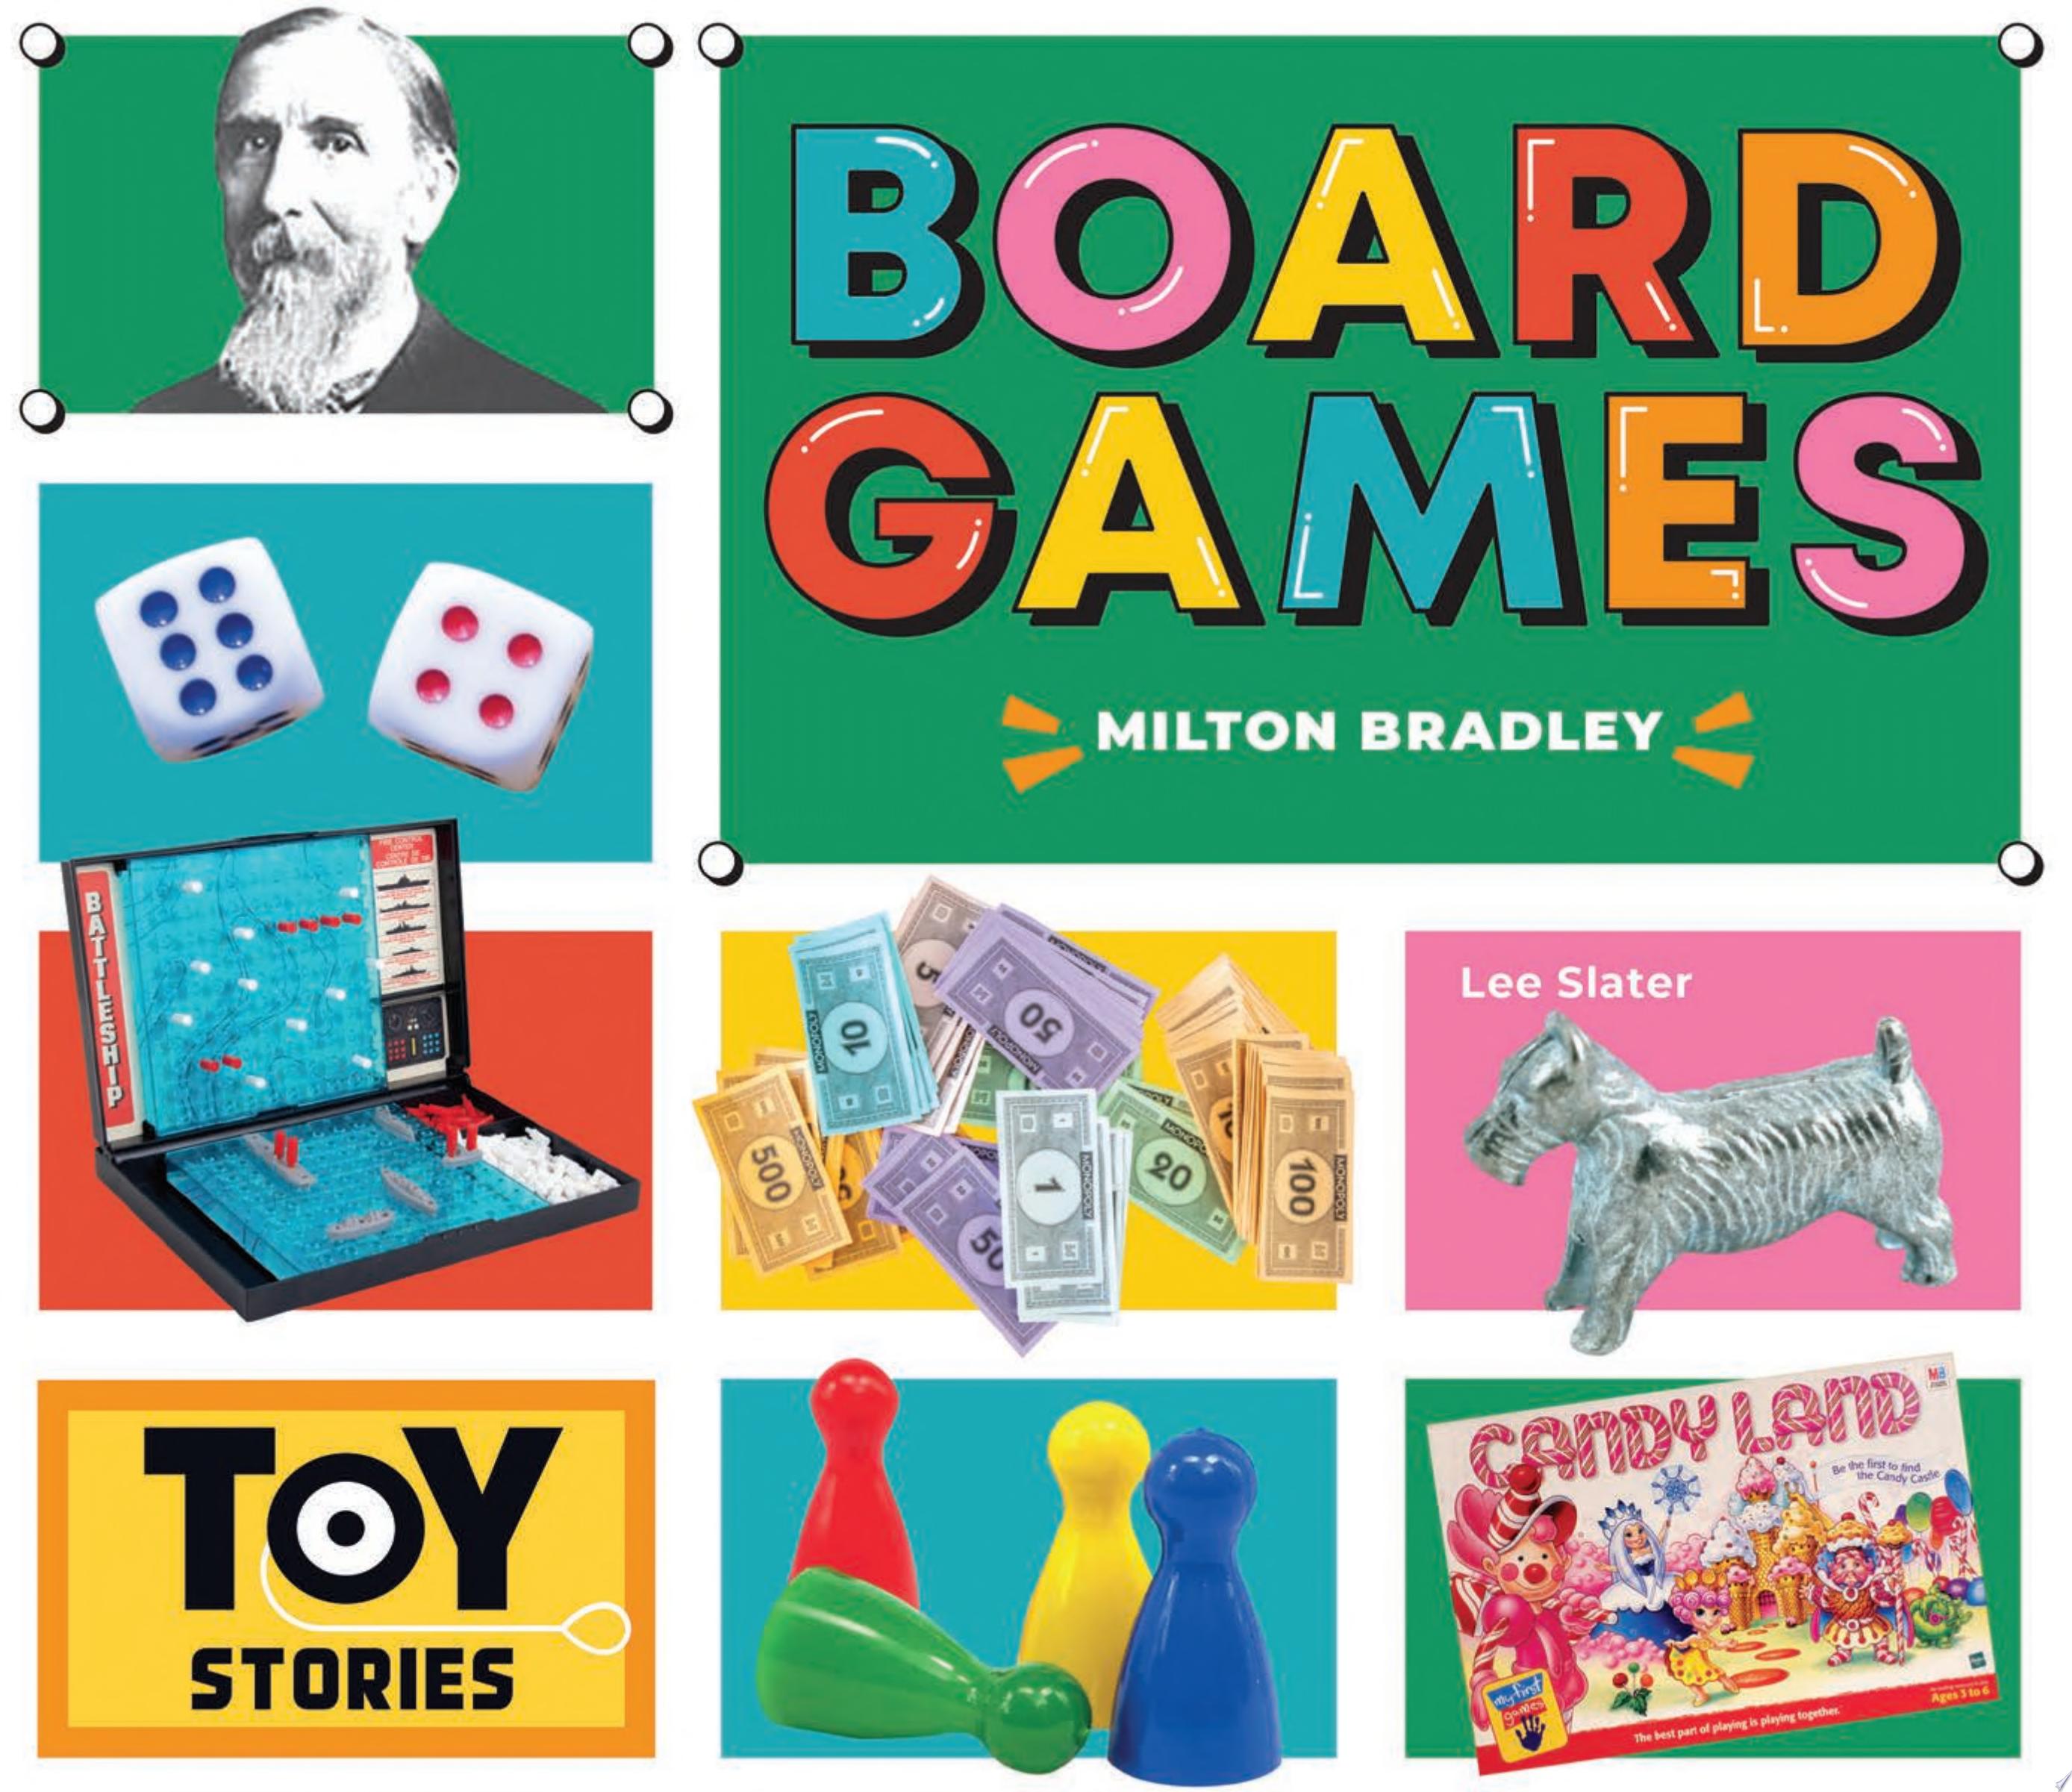 Image for "Board Games"